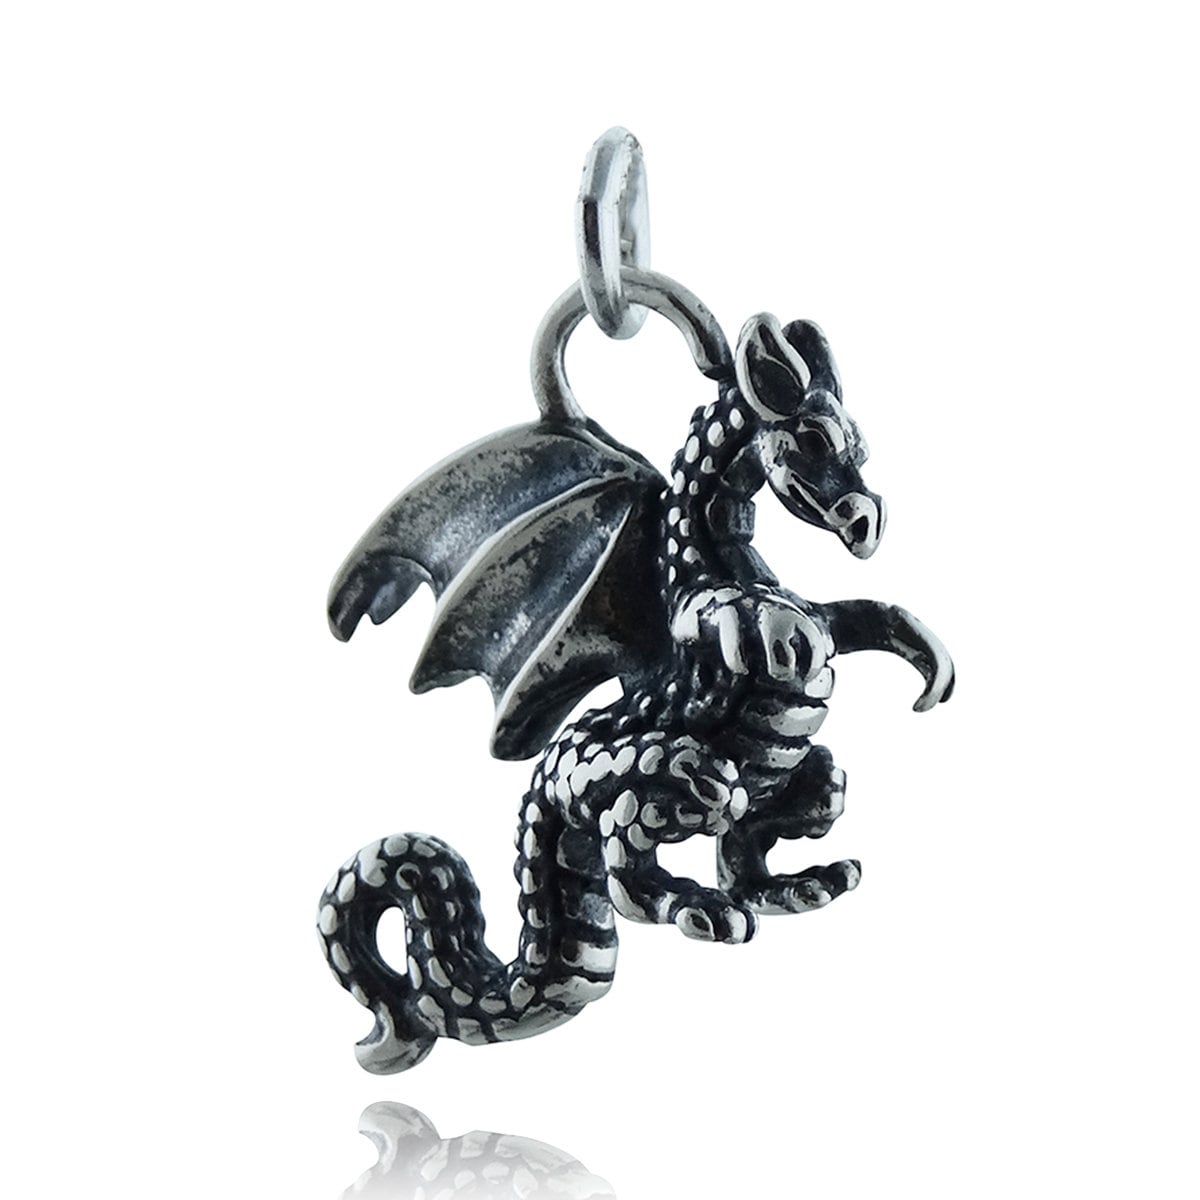 100g (20pcs) Craft Supplies Mixed Flying Dragon Charms Pendants Beads  Charms Pendants for Crafting, Jewelry Findings Making Accessory for DIY  Necklace